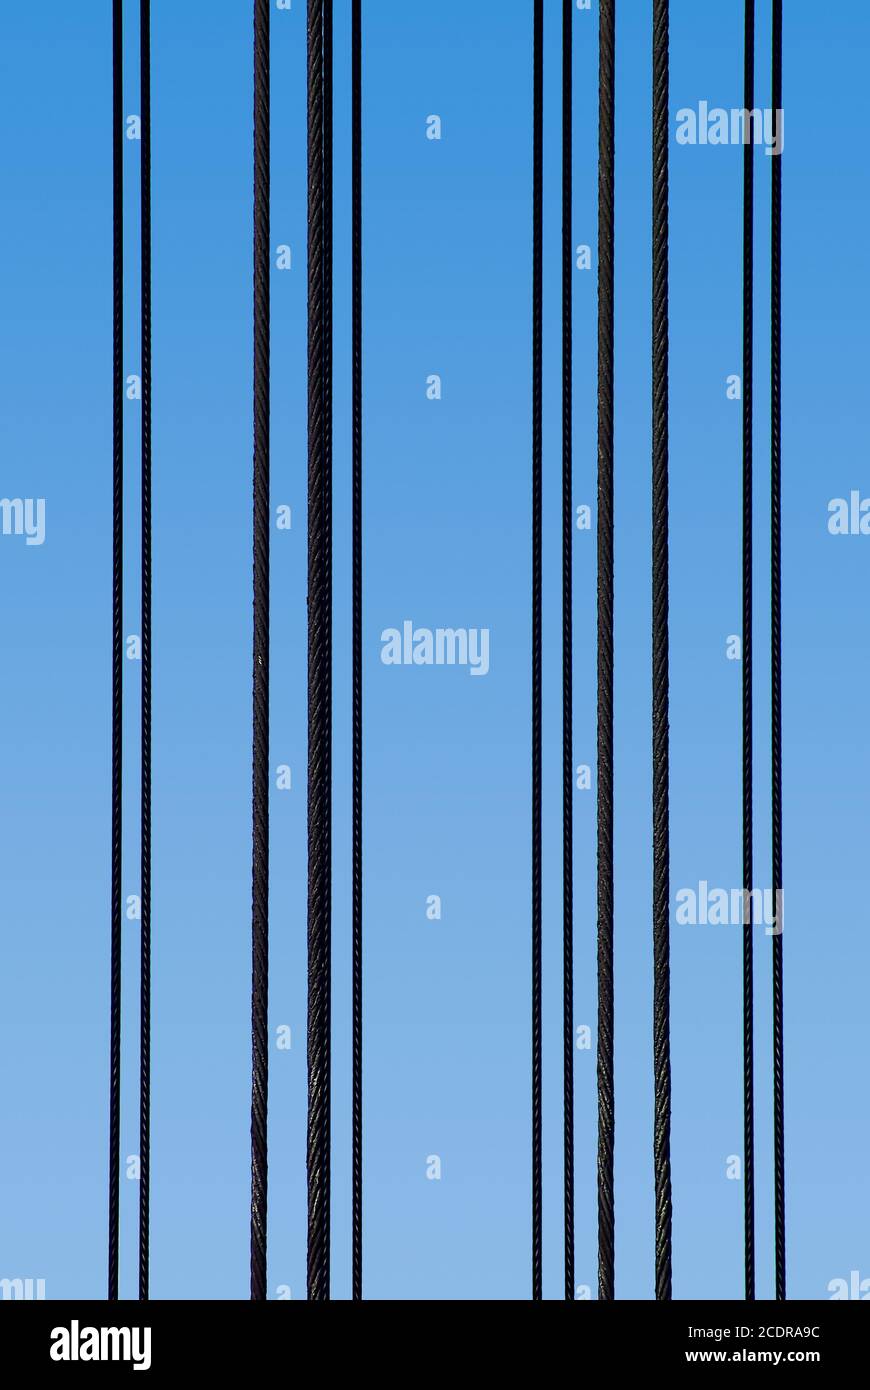 Parallel vertical steel ropes before a blue sky. Stock Photo